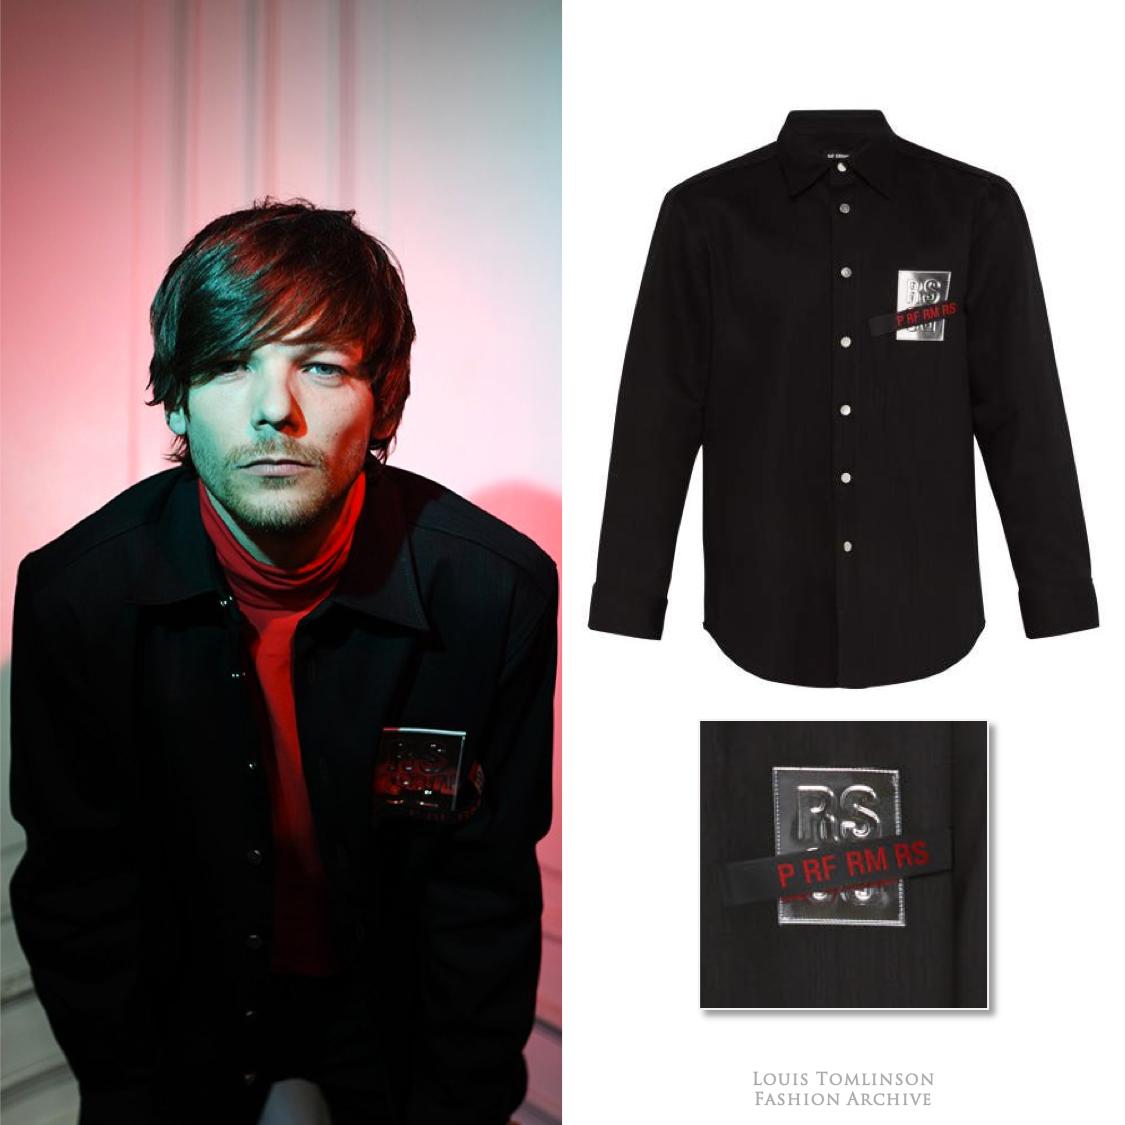 Louis Tomlinson Fashion Archive on X: Louis wore a @Topman Distressed Denim  Shacket ($120, now $36) in his editorial for @1883Magazine's #DRIVEissue.    / X